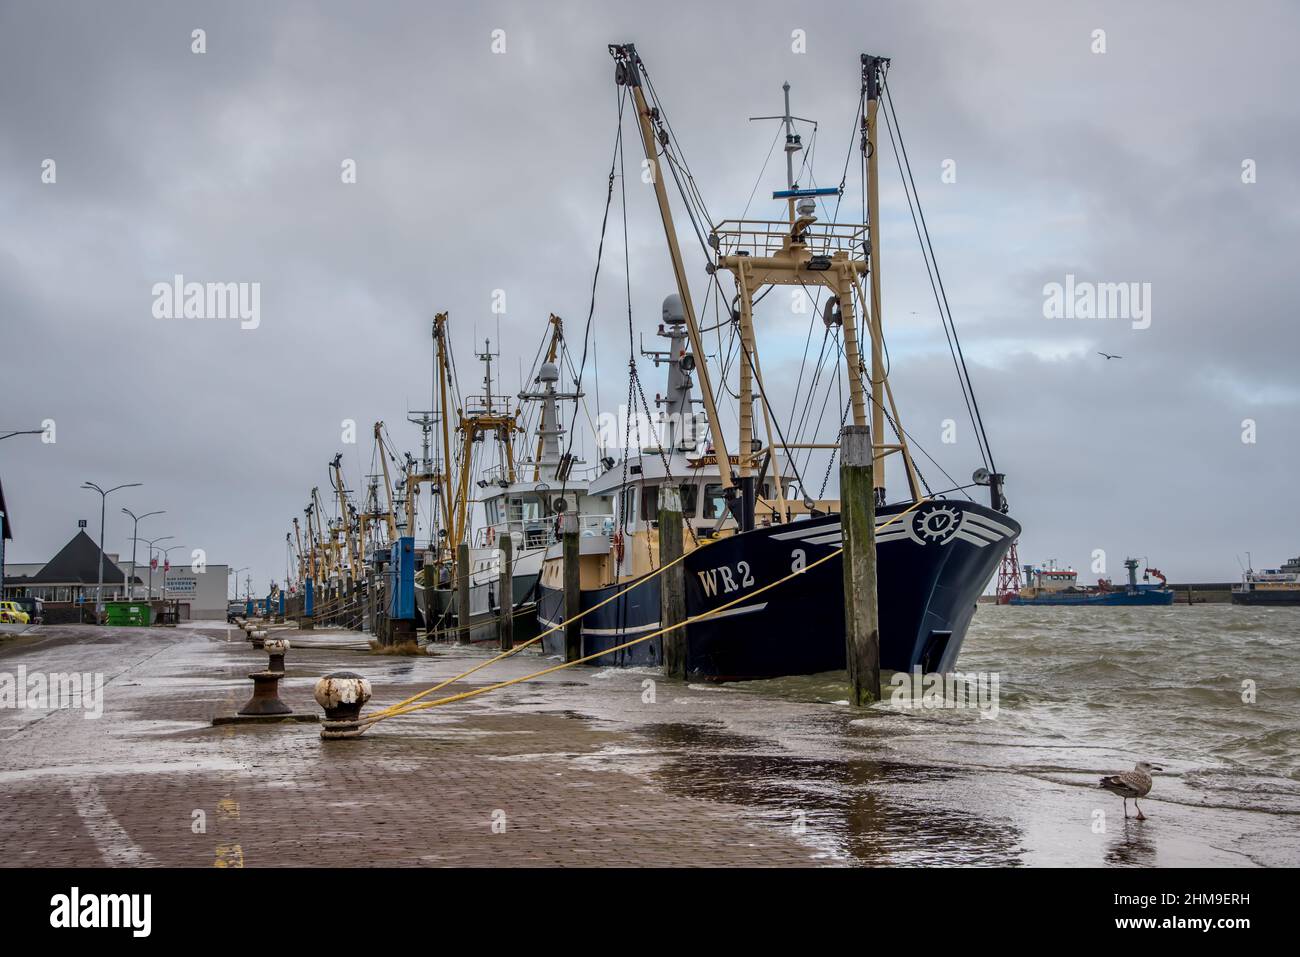 Den Oever, the Netherlands. January 2022. High tide in the harbor of Den Oever, Netherlands. High quality photo Stock Photo